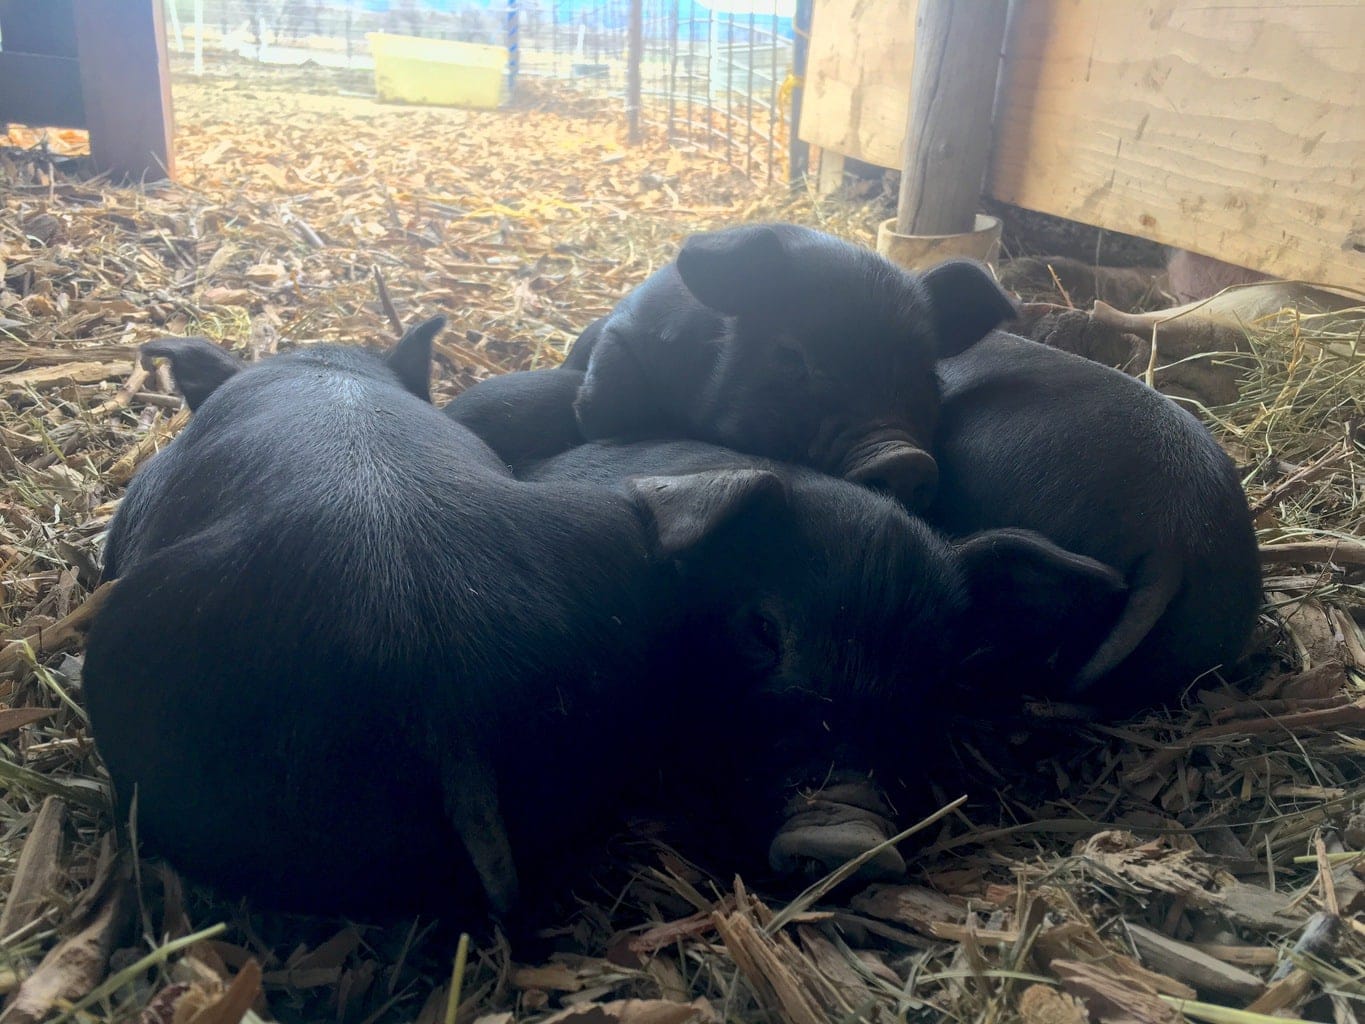 Piglets are year-round at Black Cat Farm, which supplies most of the produce for the farm-to-table, biodynamic and organic certified restaurants Bramble & Hare and Black Cat Bistro in Boulder, Colorado. 